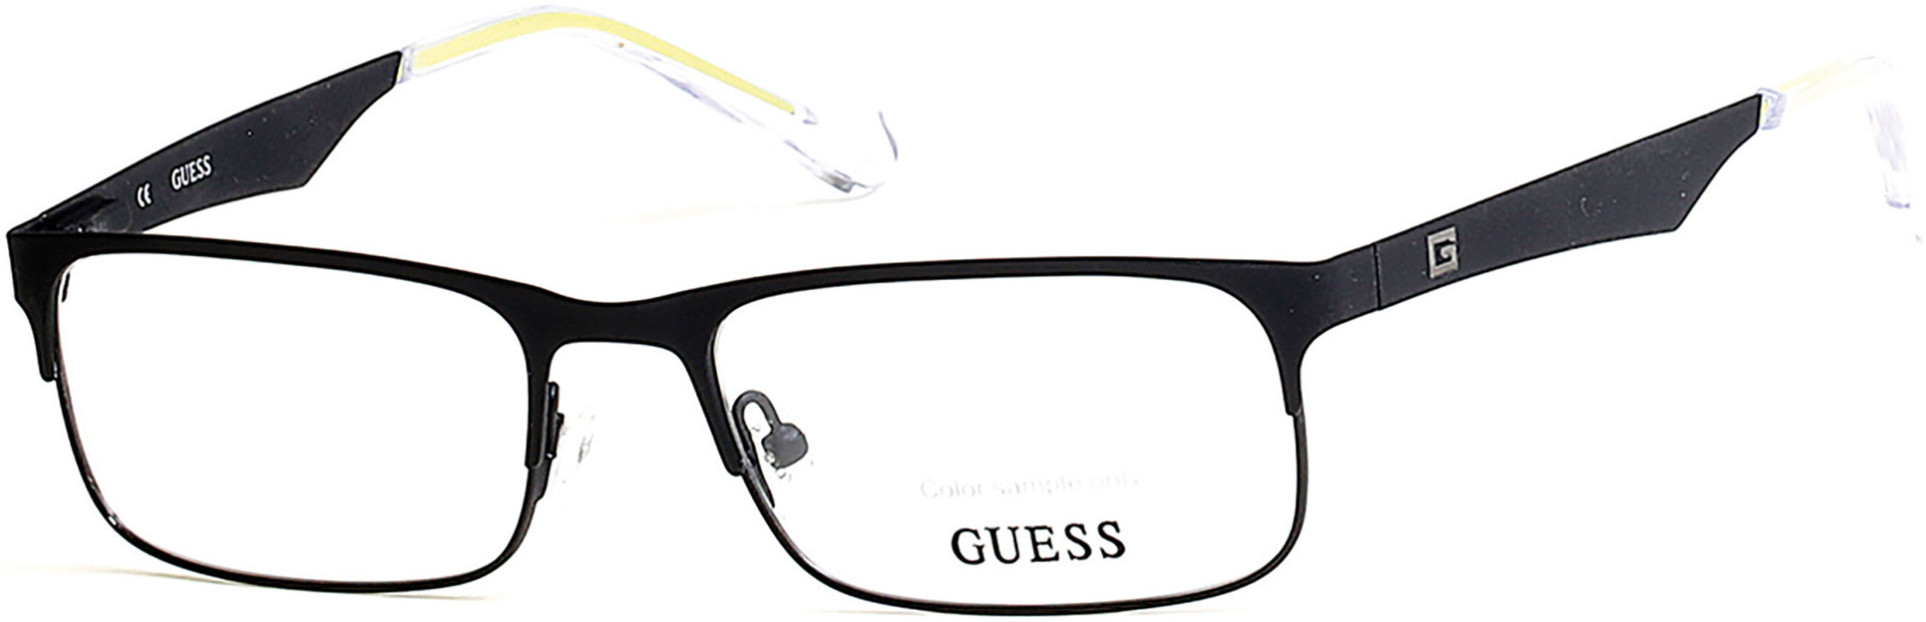 GUESS 1904 005